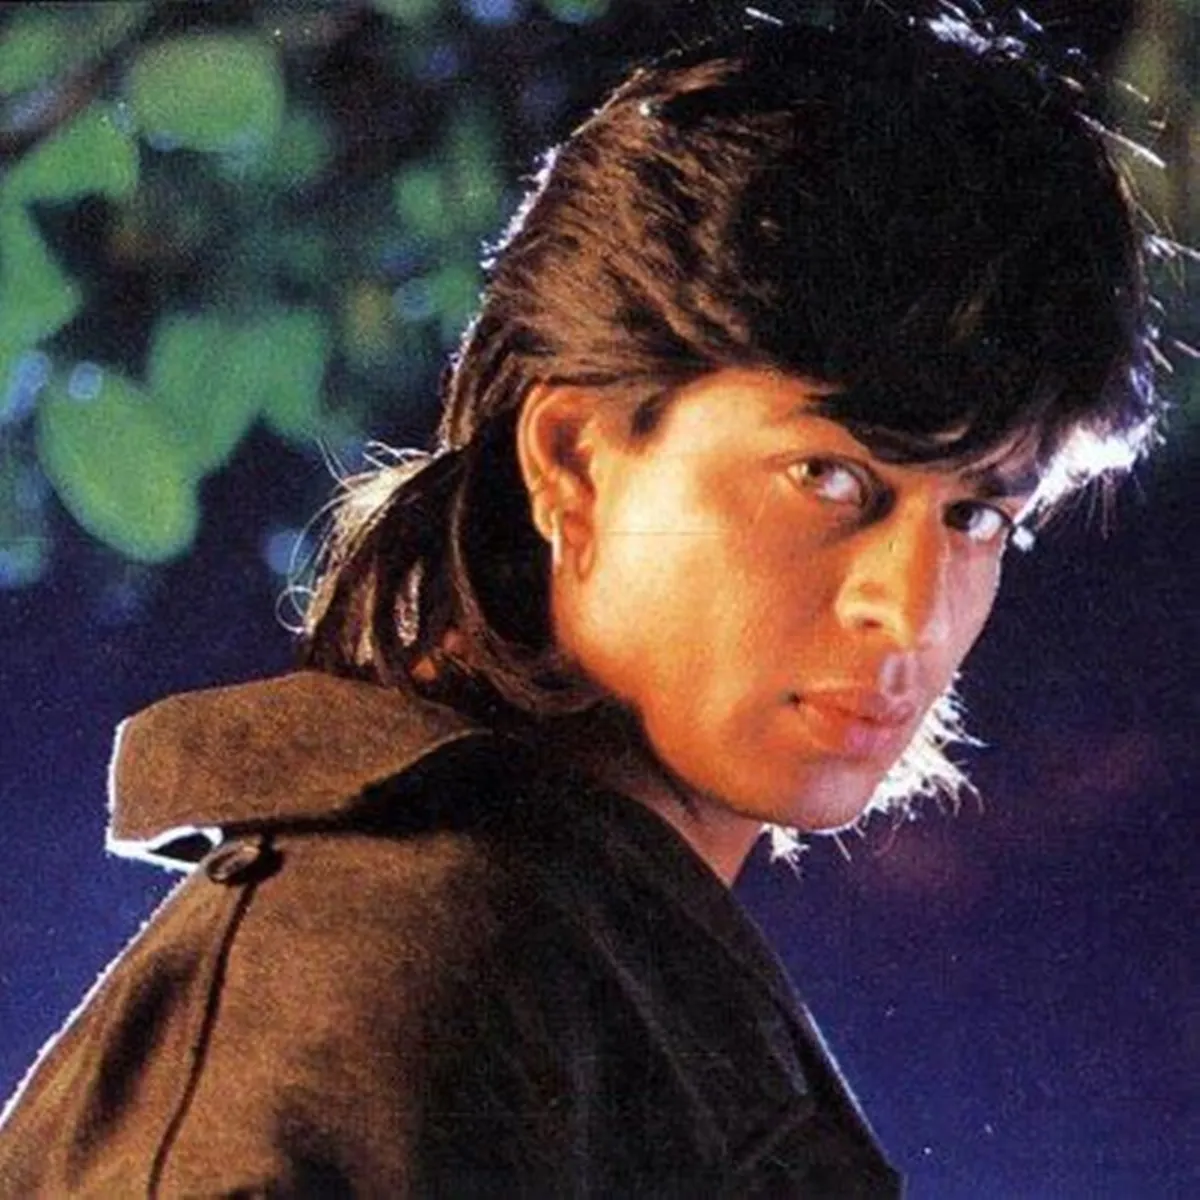 SRK 6 iconic-drool worthy hairstyles; ponytail in Pathaan to Locks in Don